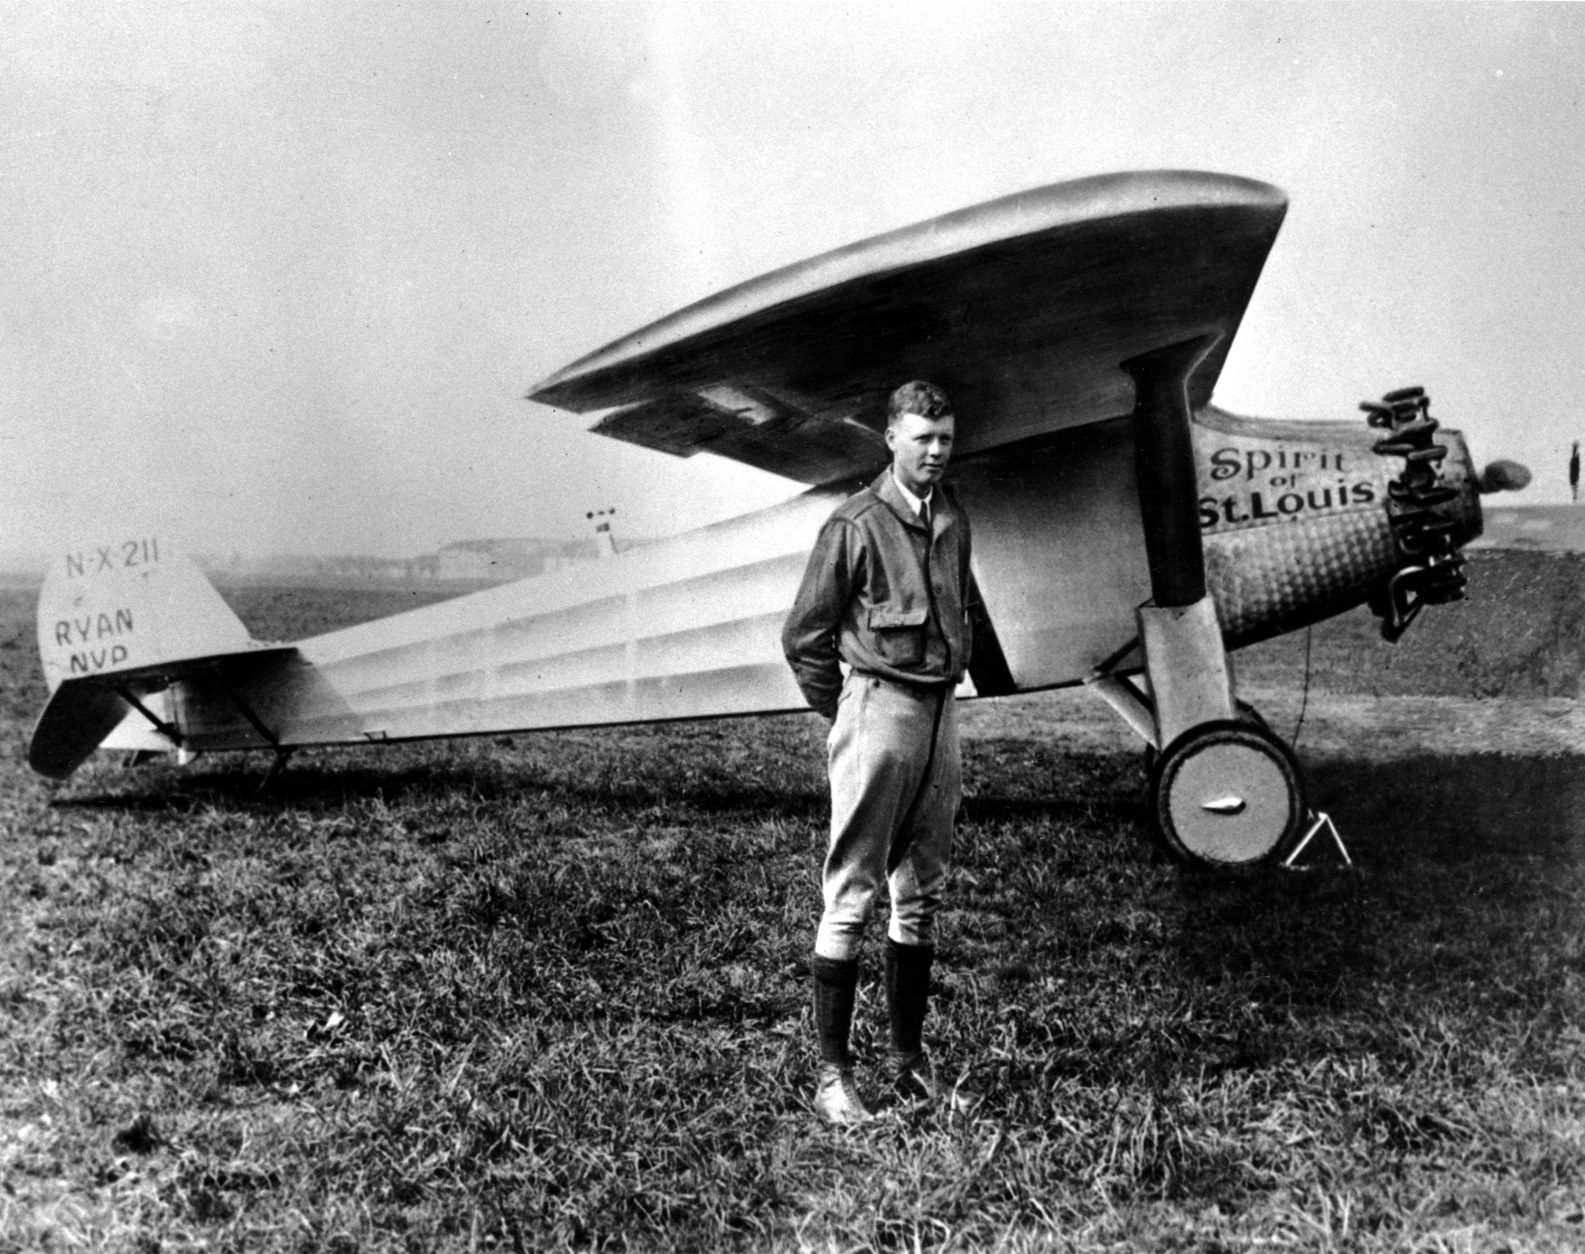 FILE - In this 1927 file photo, Charles A. Lindbergh poses with his plane "The Spirit of St. Louis." Lindberghs Spirit of St. Louis aircraft, one of the premiere artifacts at the National Air and Space Museum in Washington, was lowered to the floor Thursday, for conservation work for the first time in more than 20 years, giving visitors a rare chance to see it up close. When Lindbergh made the first trans-Atlantic flight and landed in Paris in 1927, crowds swarmed the aircraft, tearing off pieces for souvenirs. (AP Photo, File)